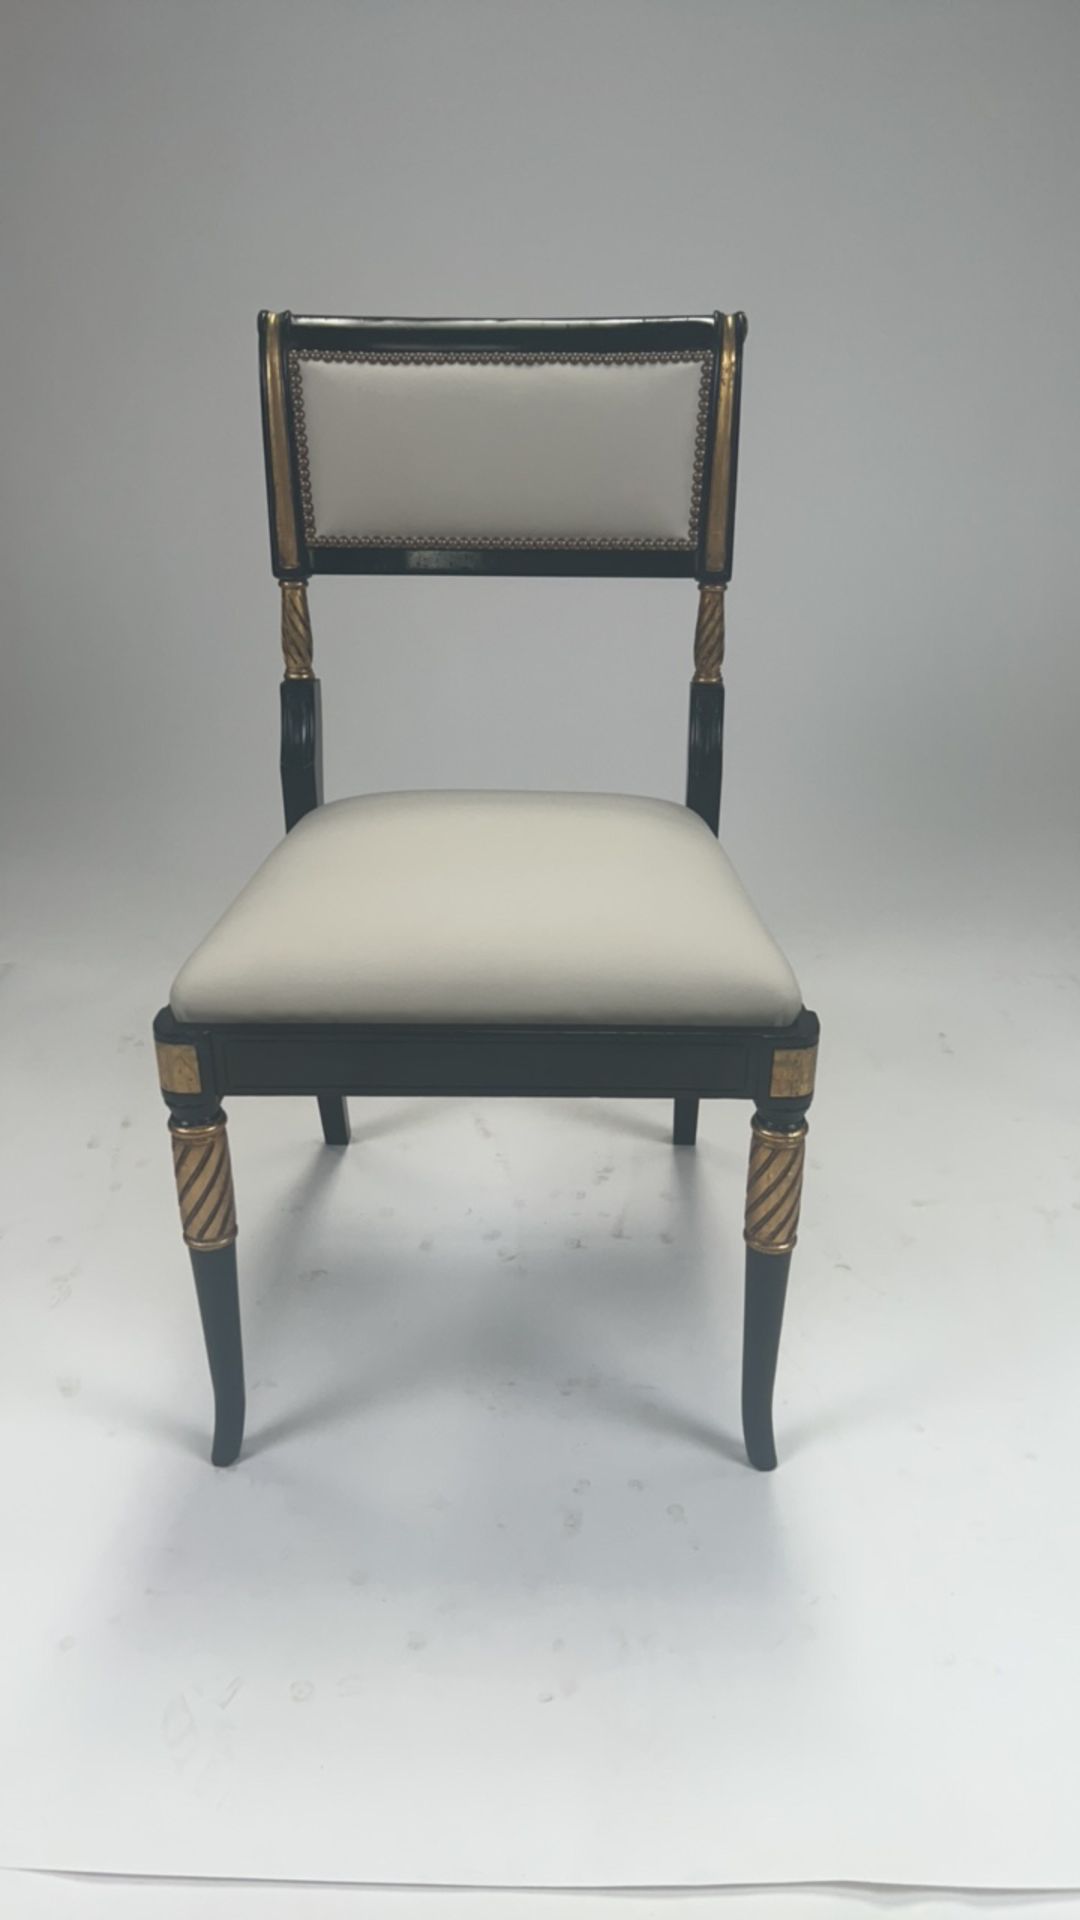 Wooden Upholstered Chair